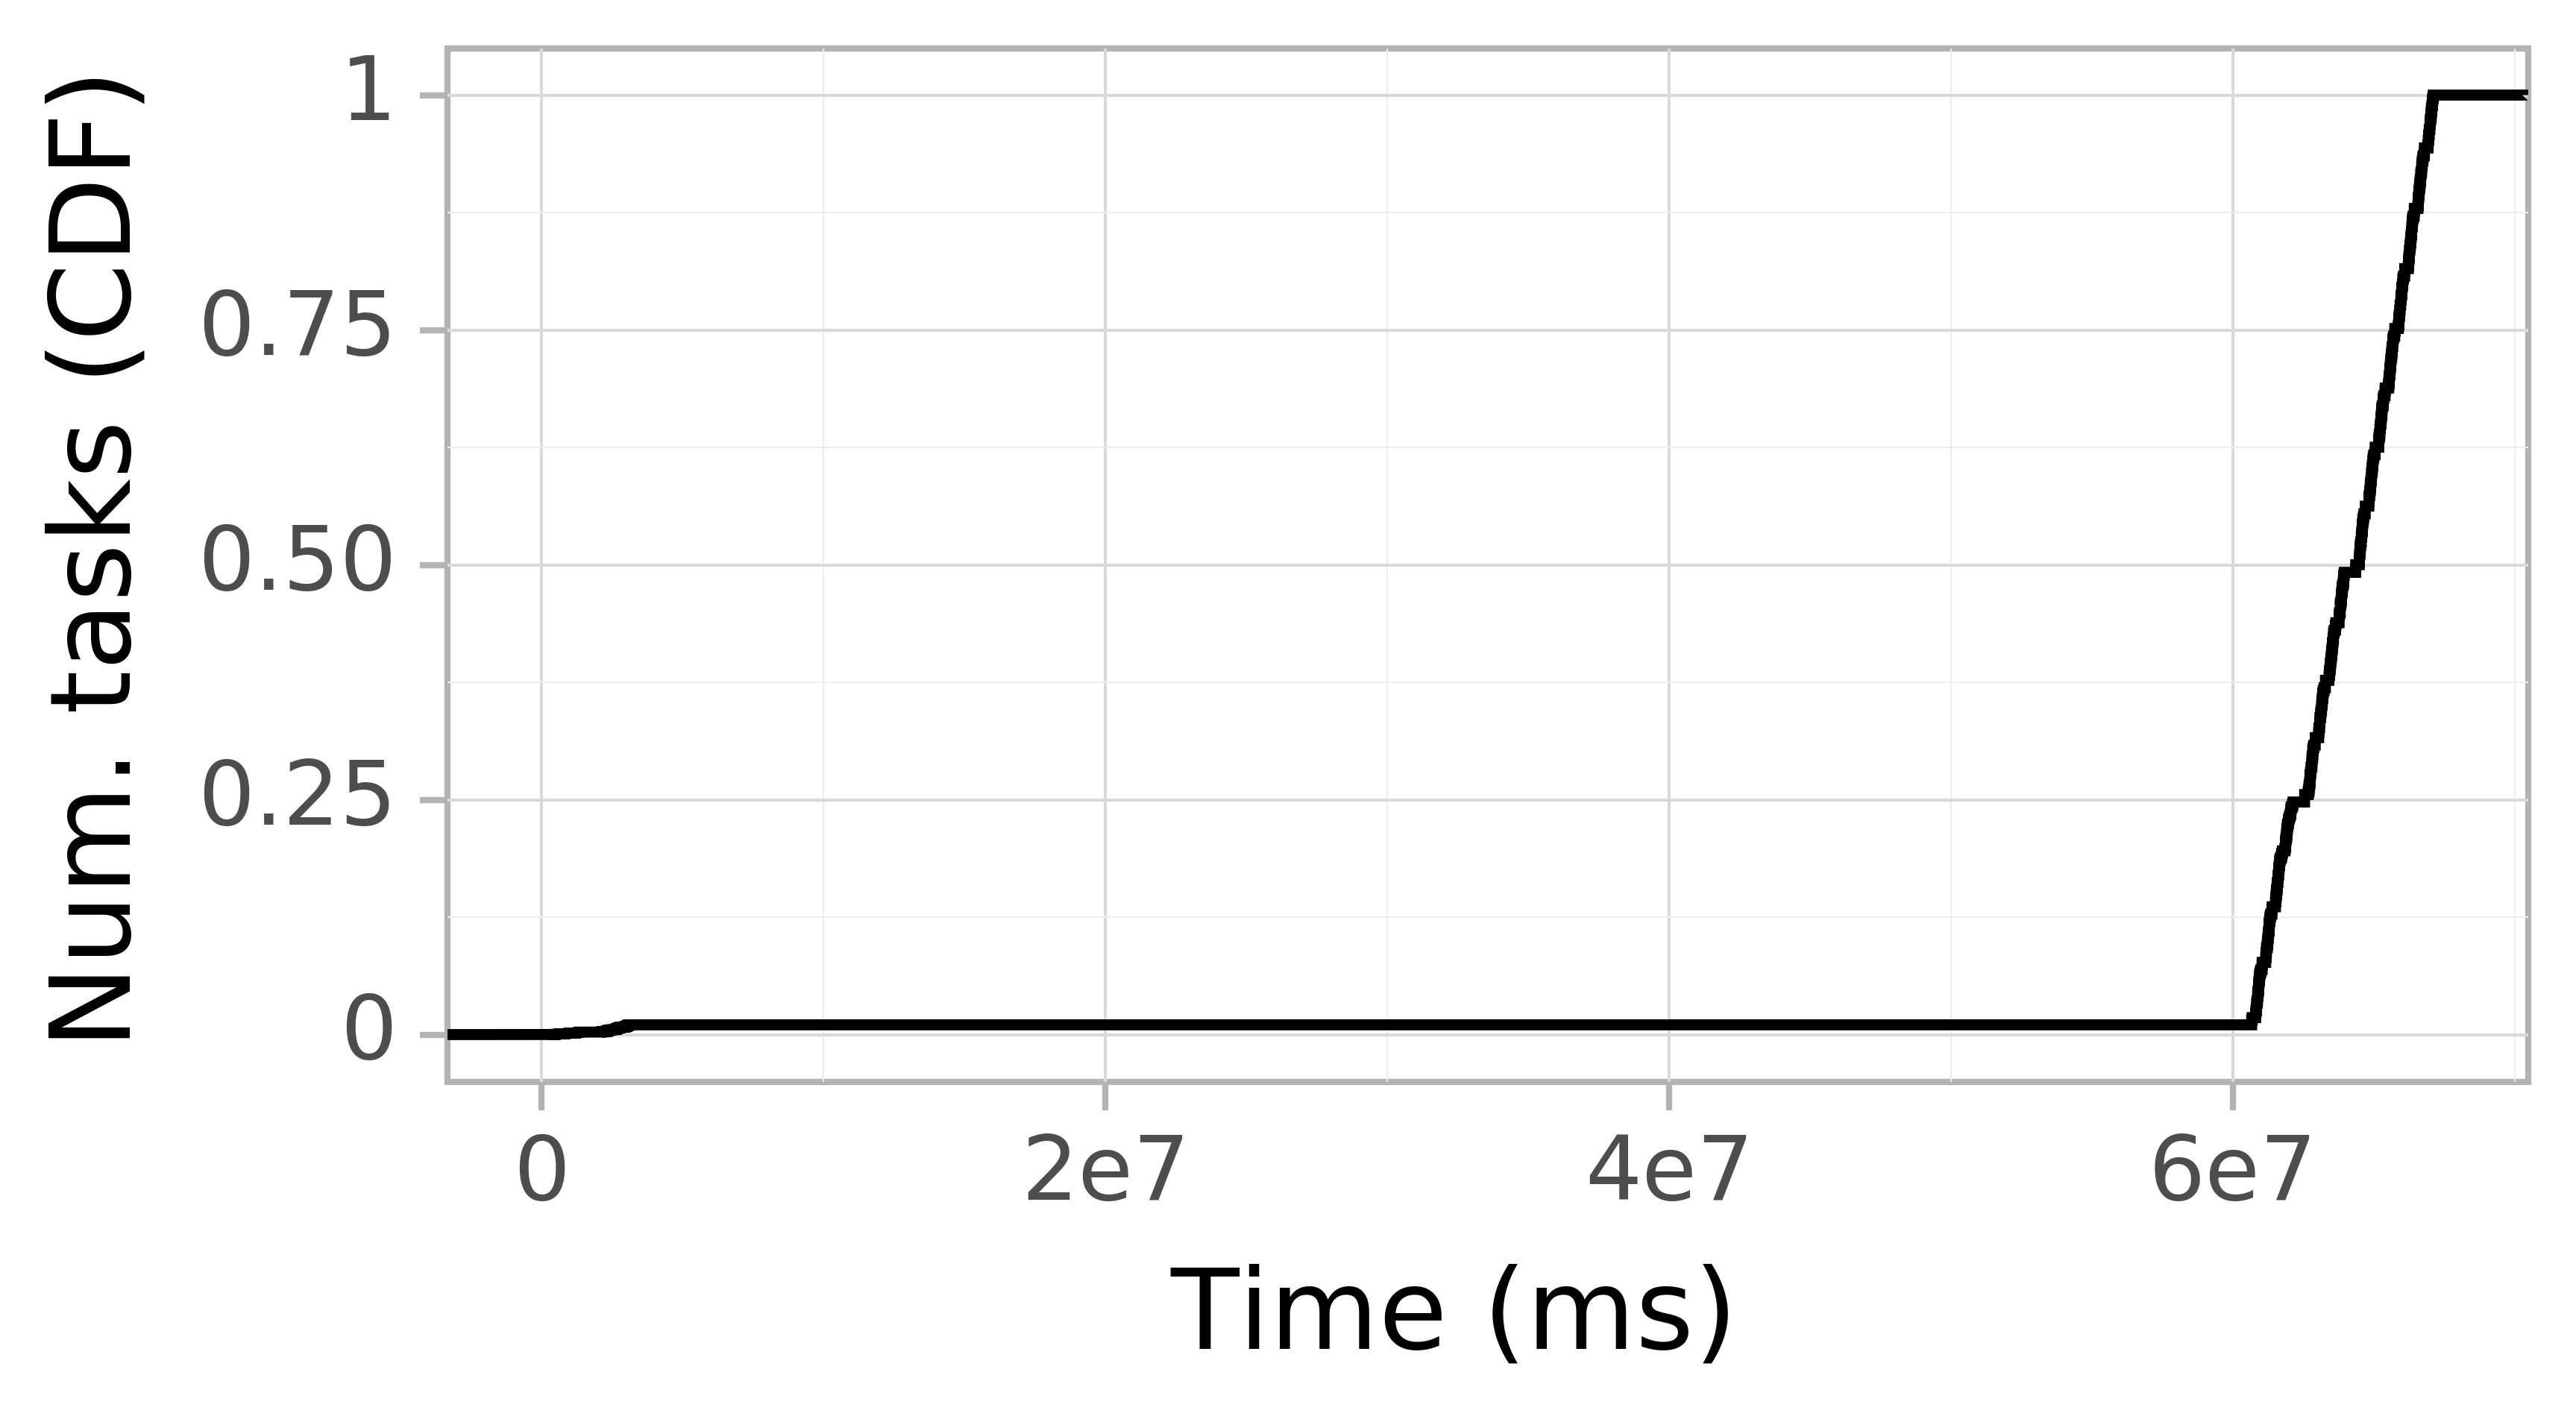 Task arrival CDF graph for the askalon-new_ee28 trace.